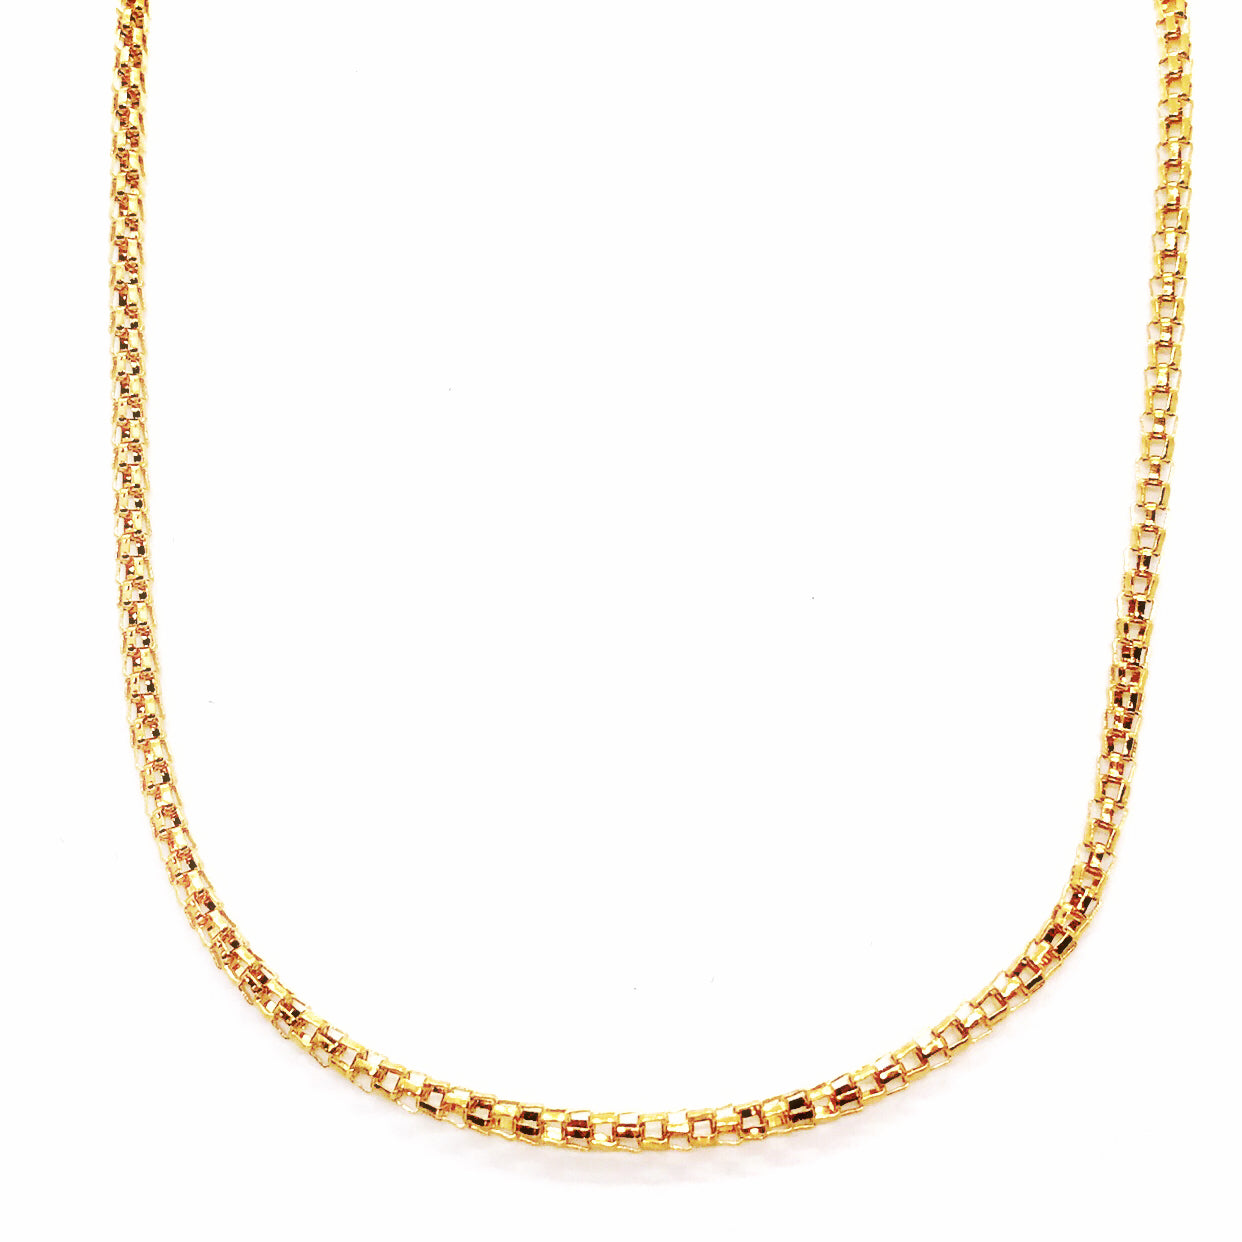 feshionn-iobi-20-inch-18k-gold-plated-hollow-stainless-steel-popcorn-link-chain